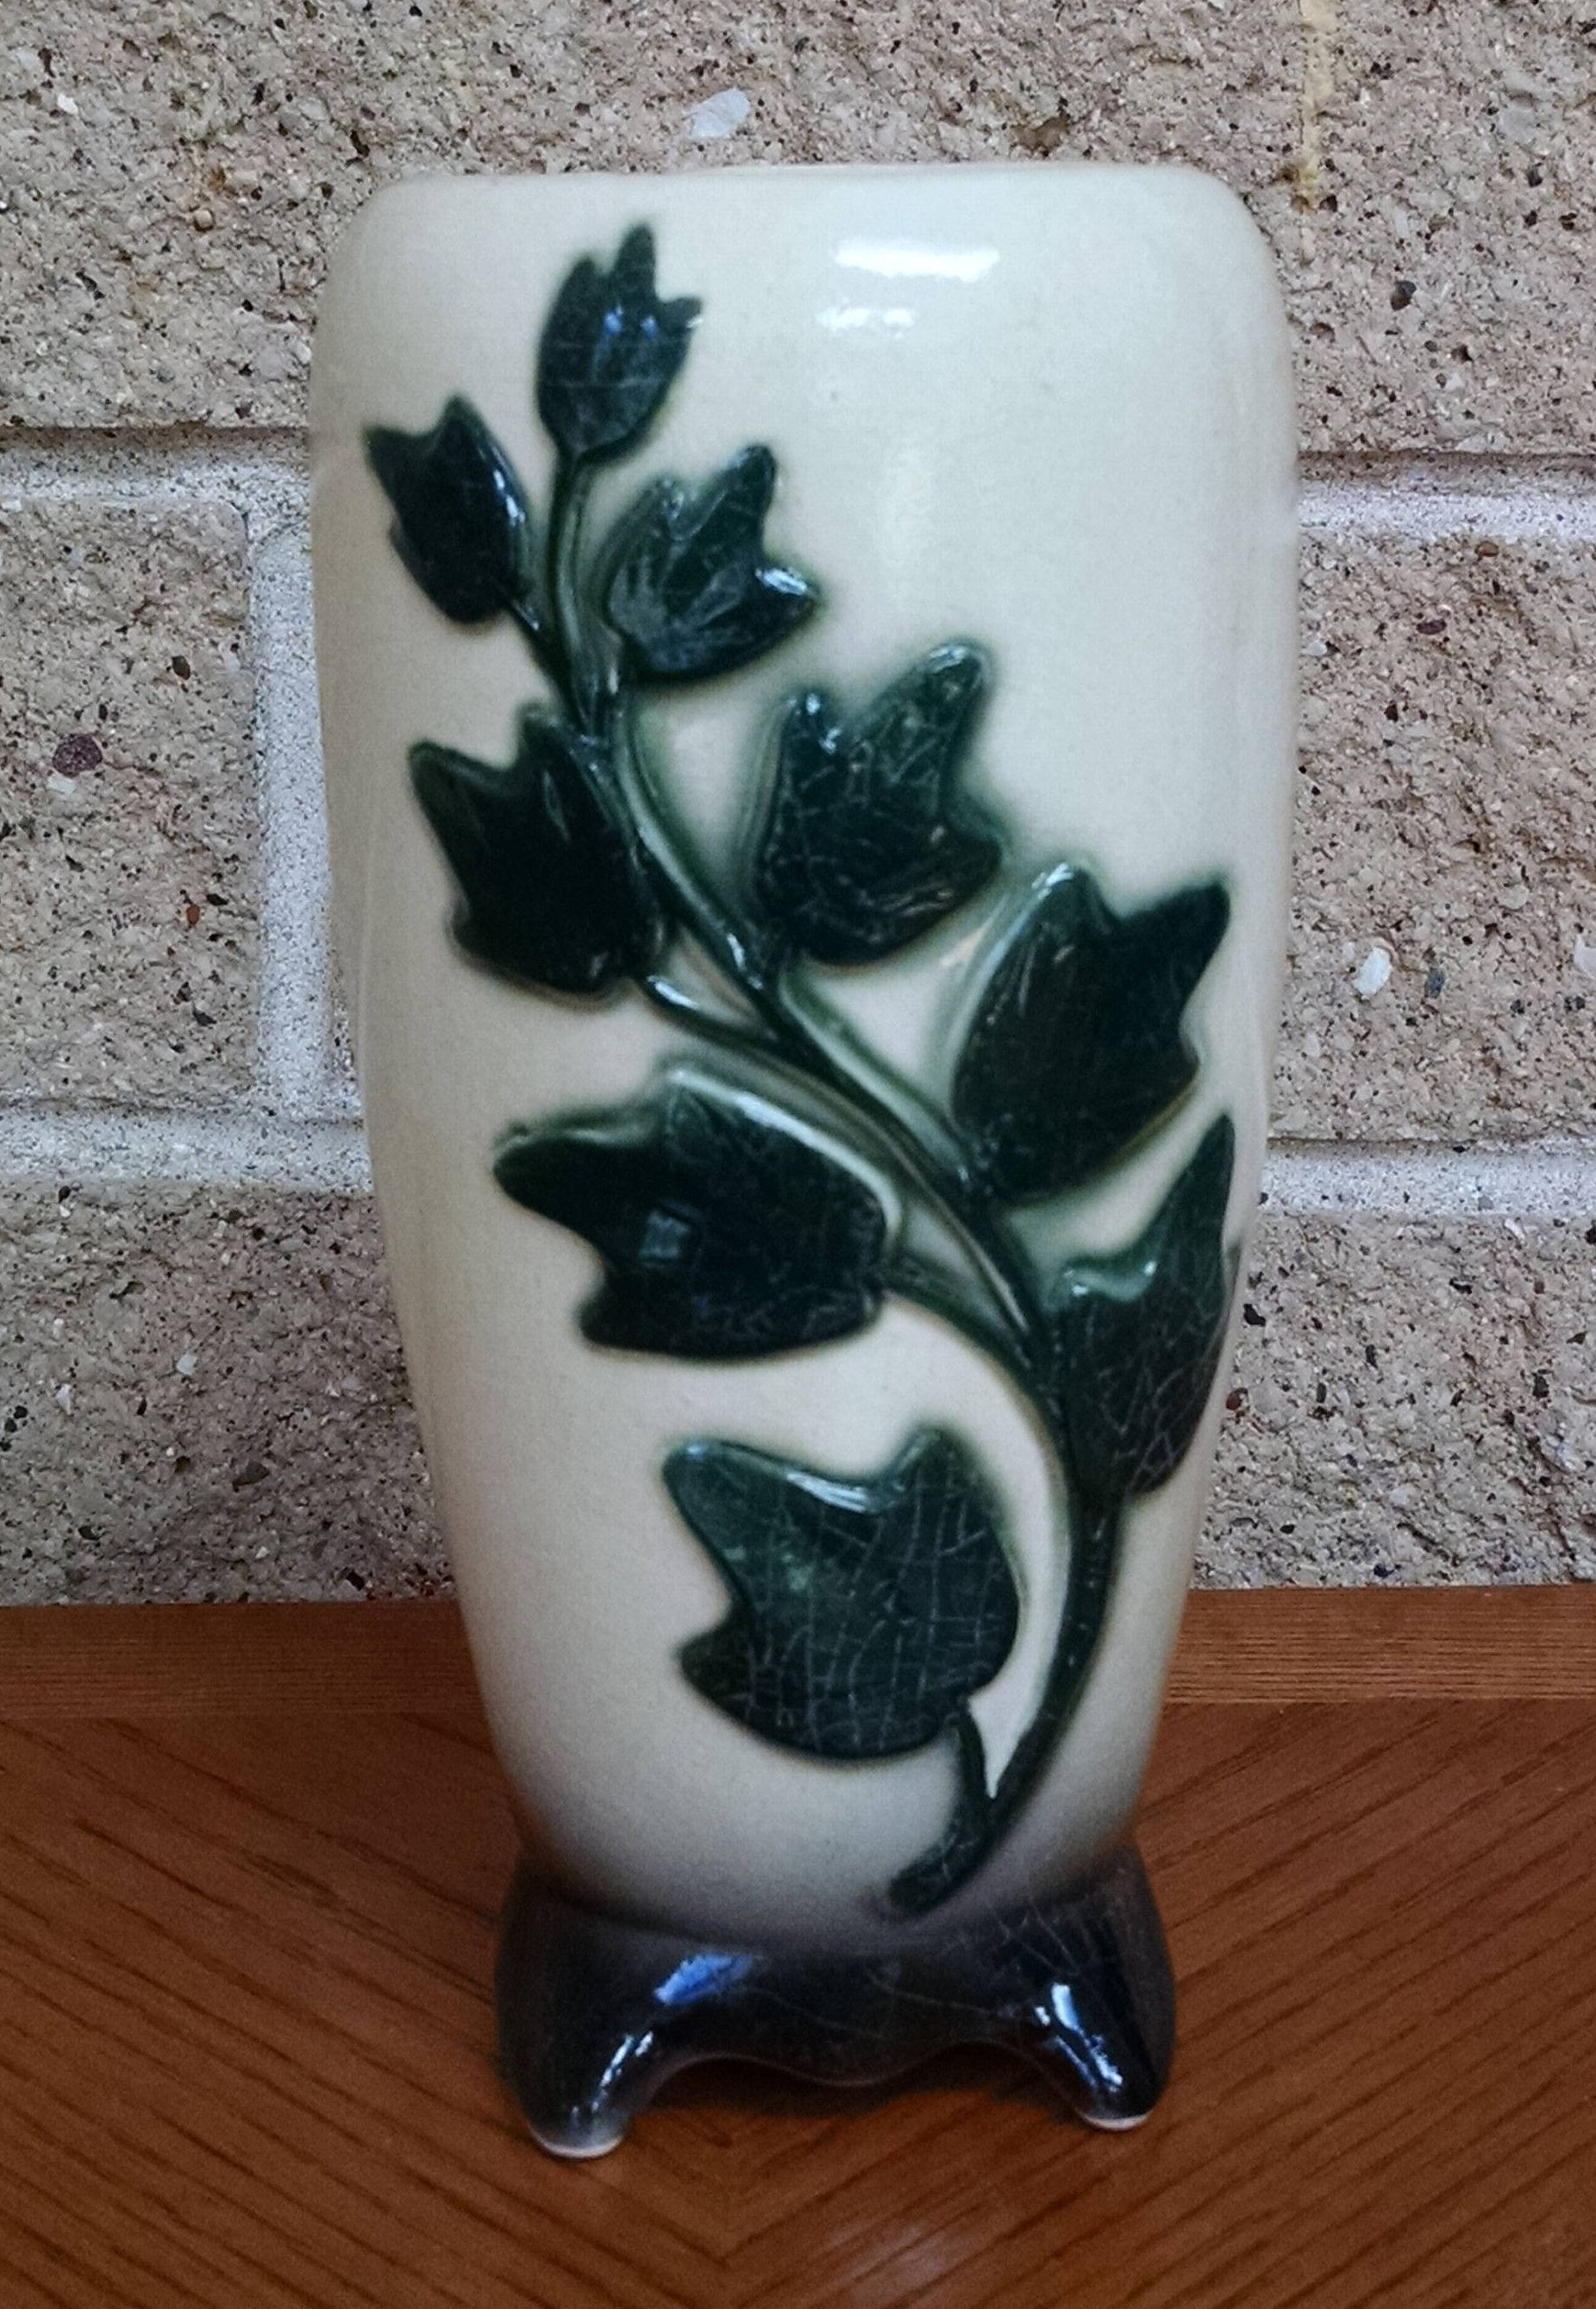 13 Recommended Abingdon Usa Pottery Vase 2024 free download abingdon usa pottery vase of royal copley ivy vase cream and green with black base vintage for royal copley ivy vase cream and green with black base vintage pottery vase spaulding china coll